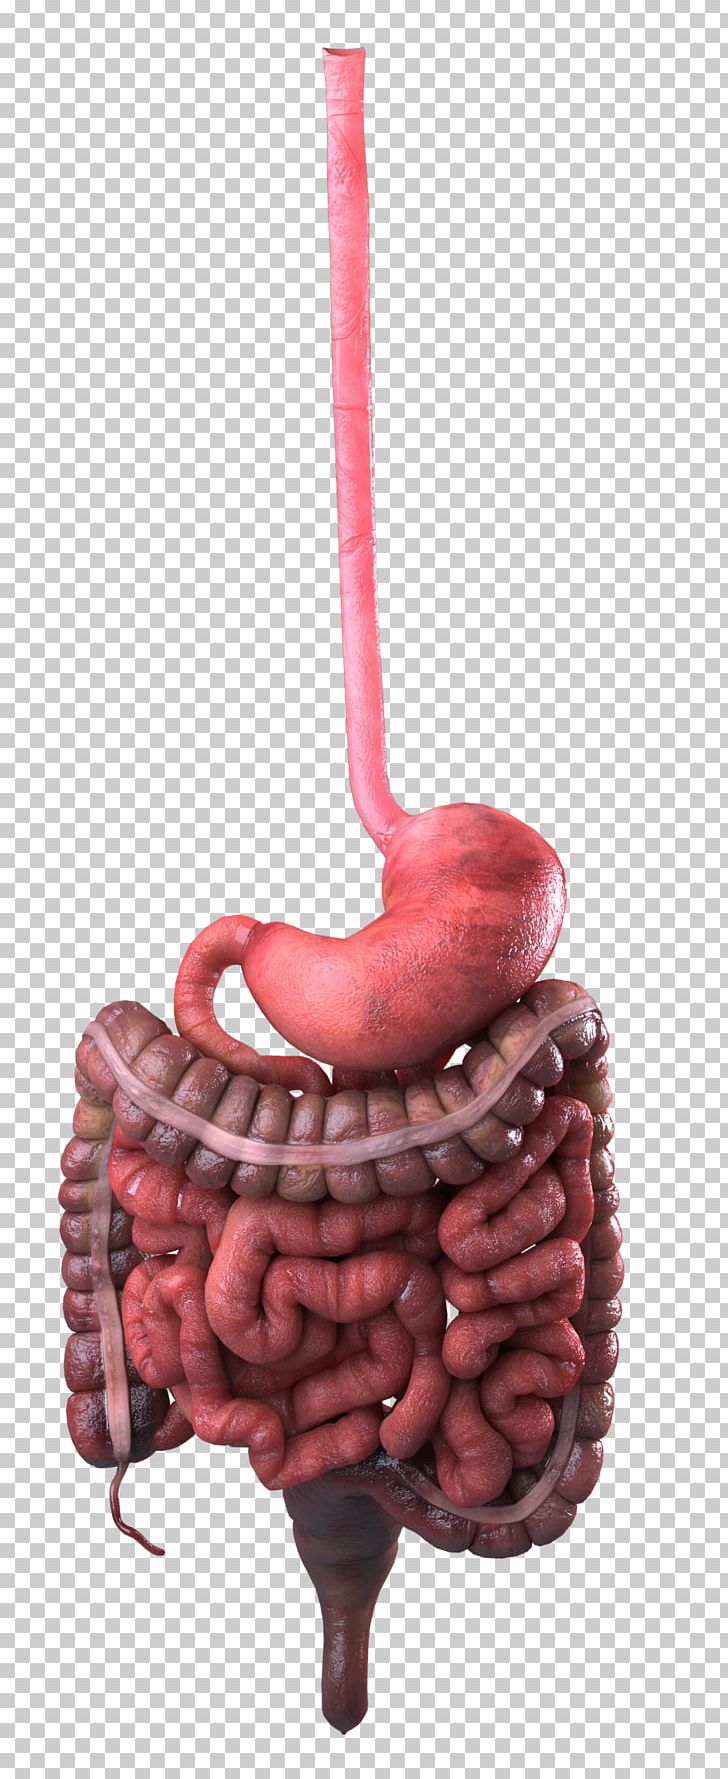 Stomach Pancreas Digestive Enzyme Small Intestine Gastrointestinal Tract PNG, Clipart, Blood, Blood Sugar, Blood Sugar Regulation, Digestion, Digestive Enzyme Free PNG Download